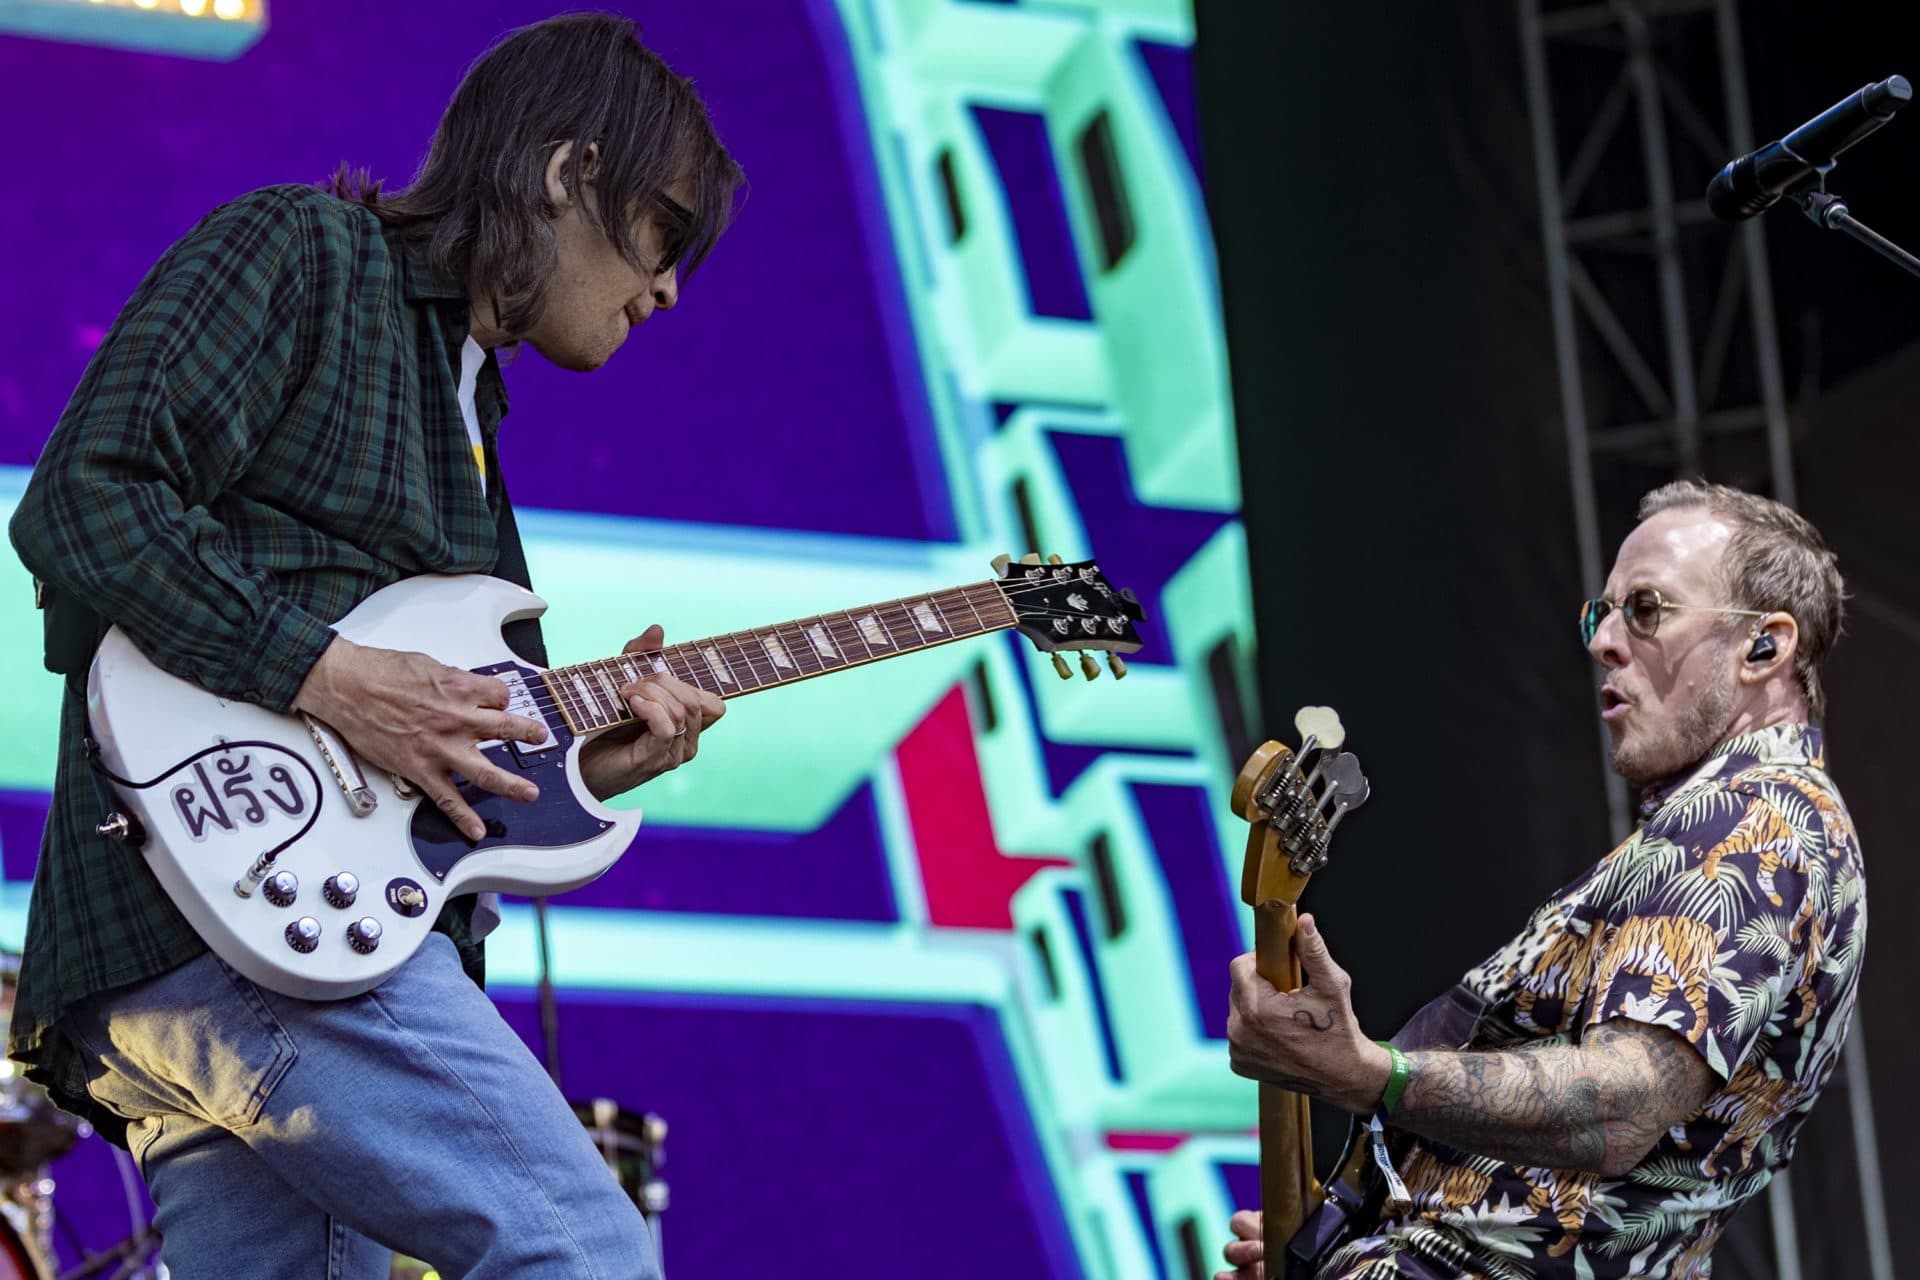 Rivers Cuomo and Scott Shriner of Weezer perform at the Boston Calling Music Festival. (Jesse Costa/WBUR)